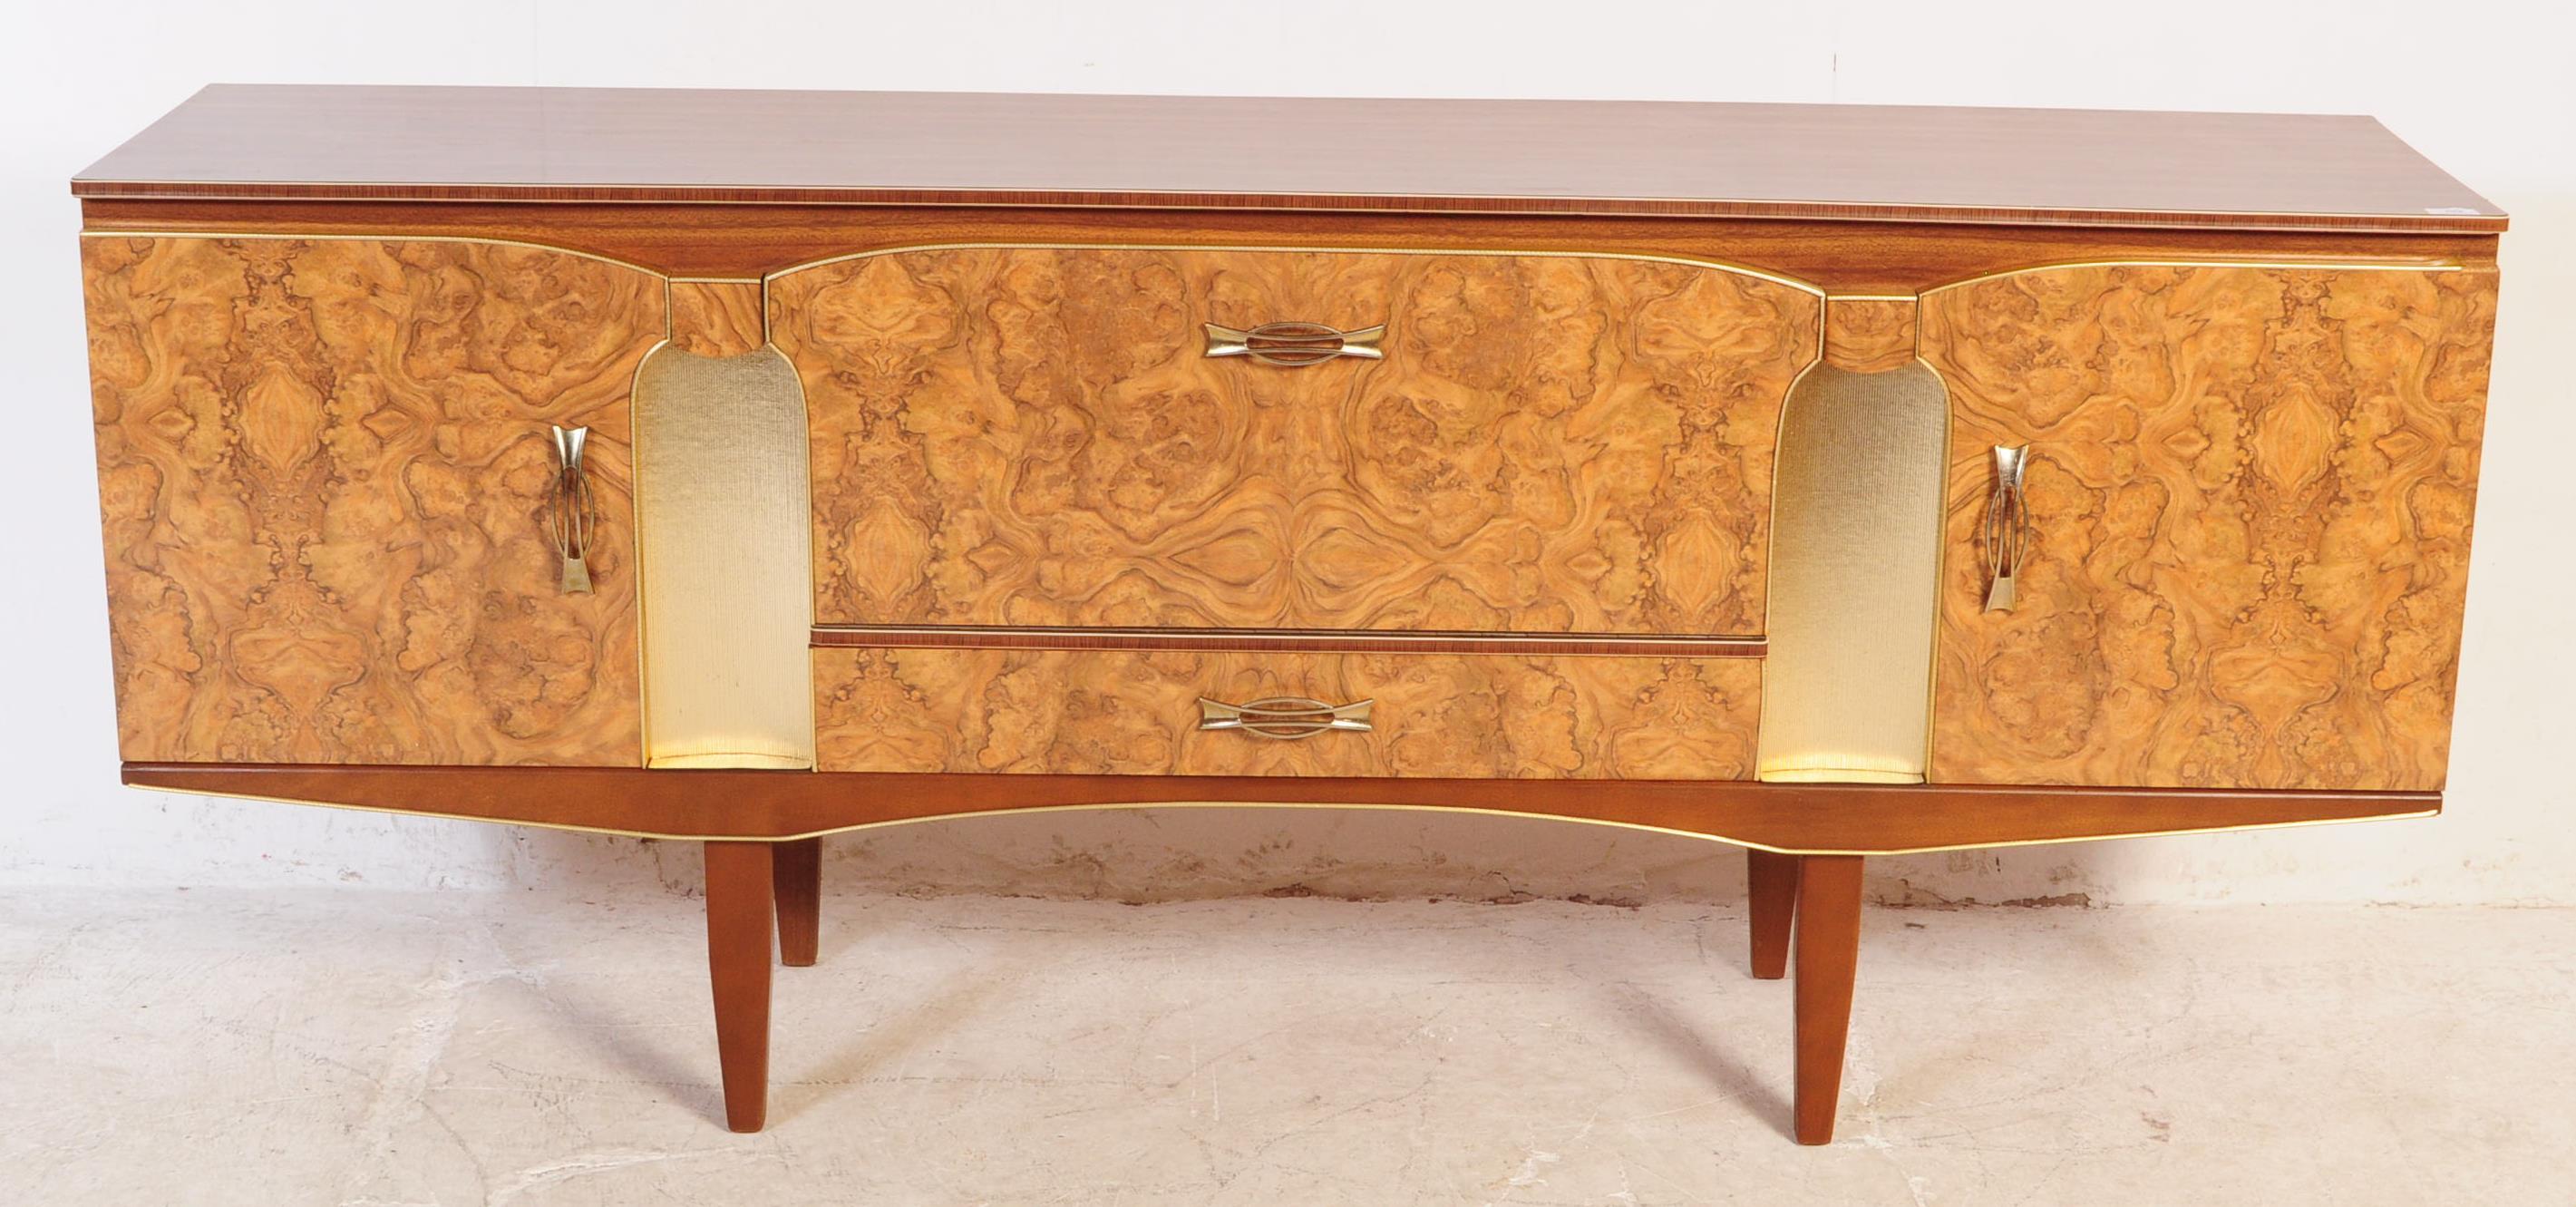 MID 20TH CENTURY BEAUTILITY WALNUT FORMICA SIDEBOARD - Image 2 of 8